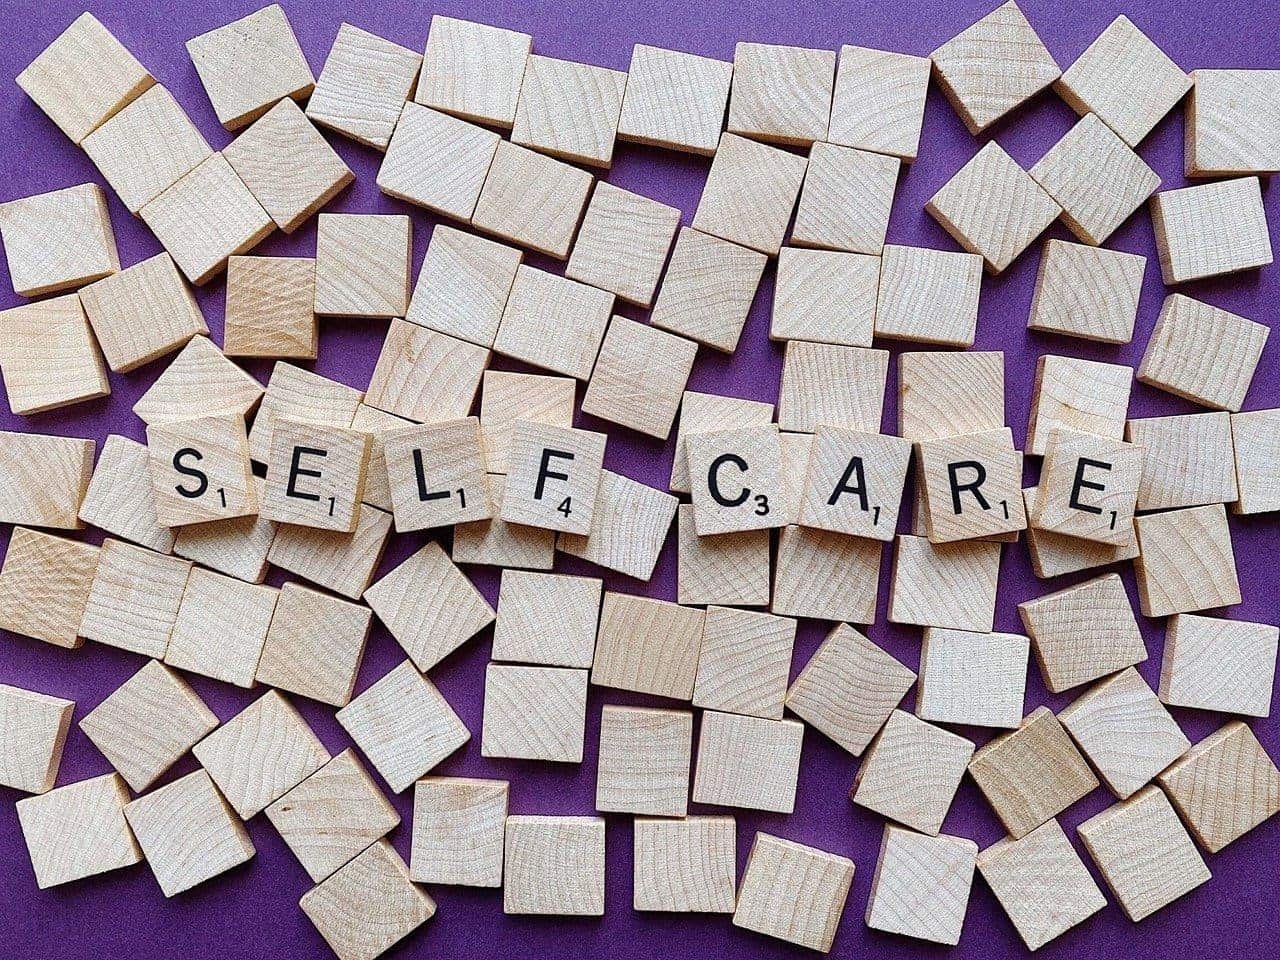 A brand new year means resolutions to better ourselves. Are you looking for a few tips to help you with your self-care list? Learn 6 self-care resolutions here.